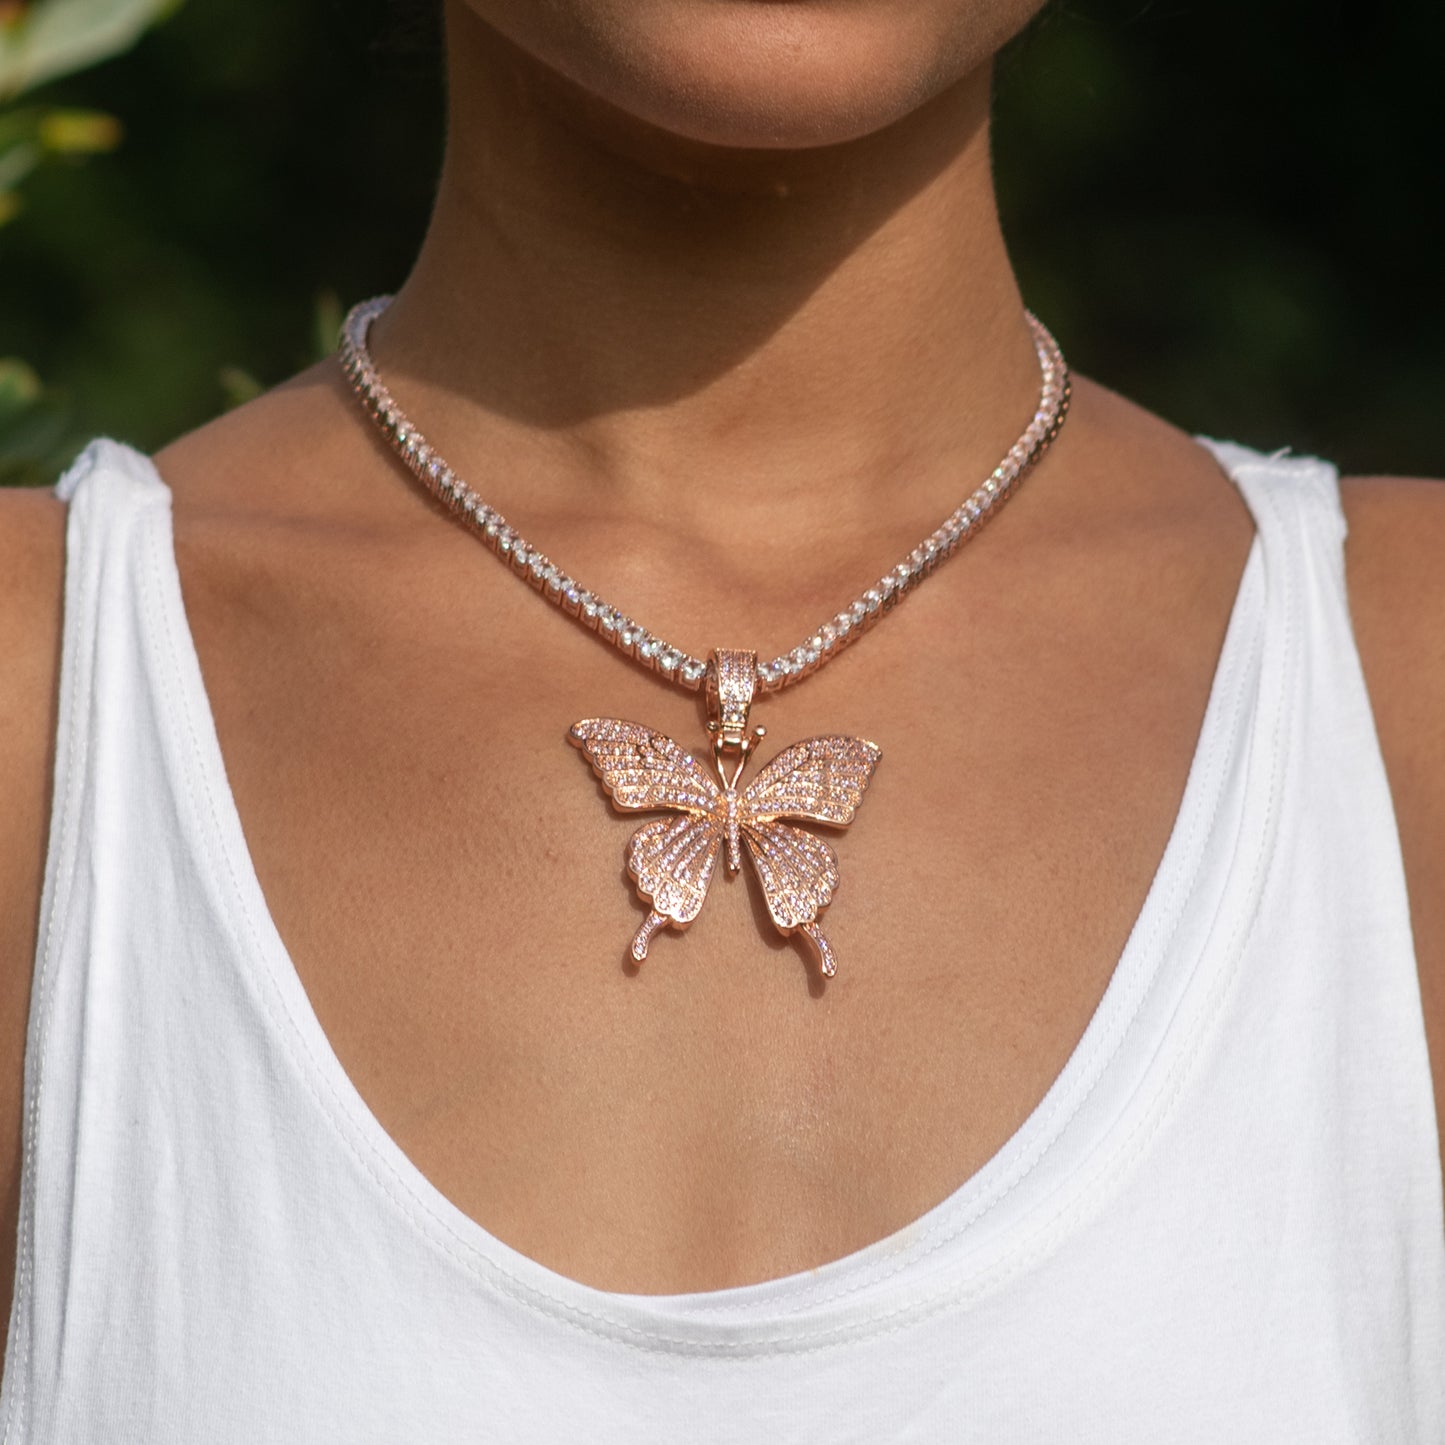 Big Butterfly Chain - Rose